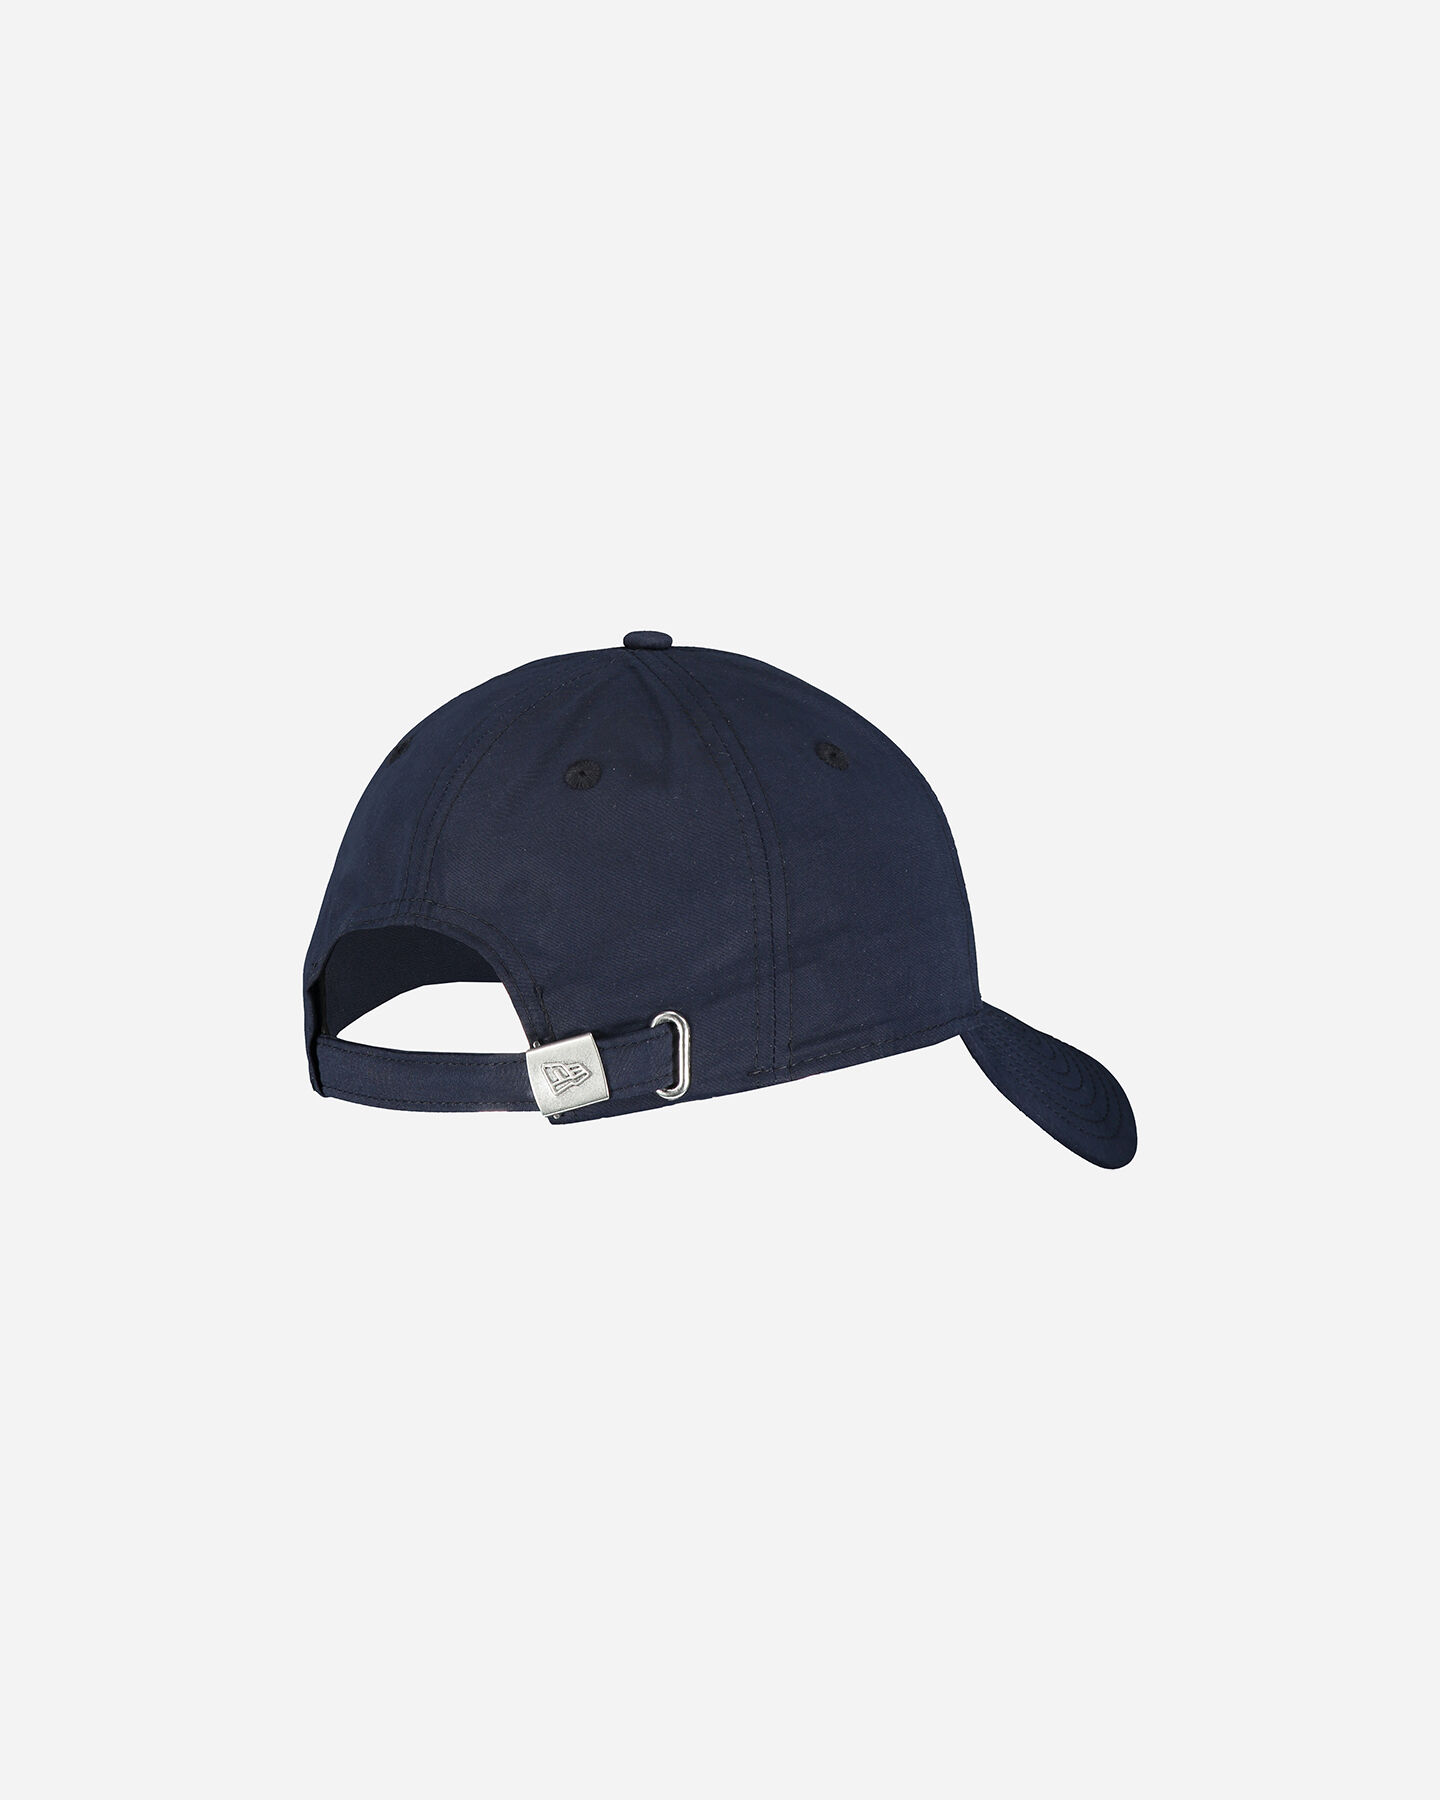  Cappellino NEW ERA 9FORTY FLAWLESS NEW YORK YANKEES M S5061562|410|OSFA scatto 1